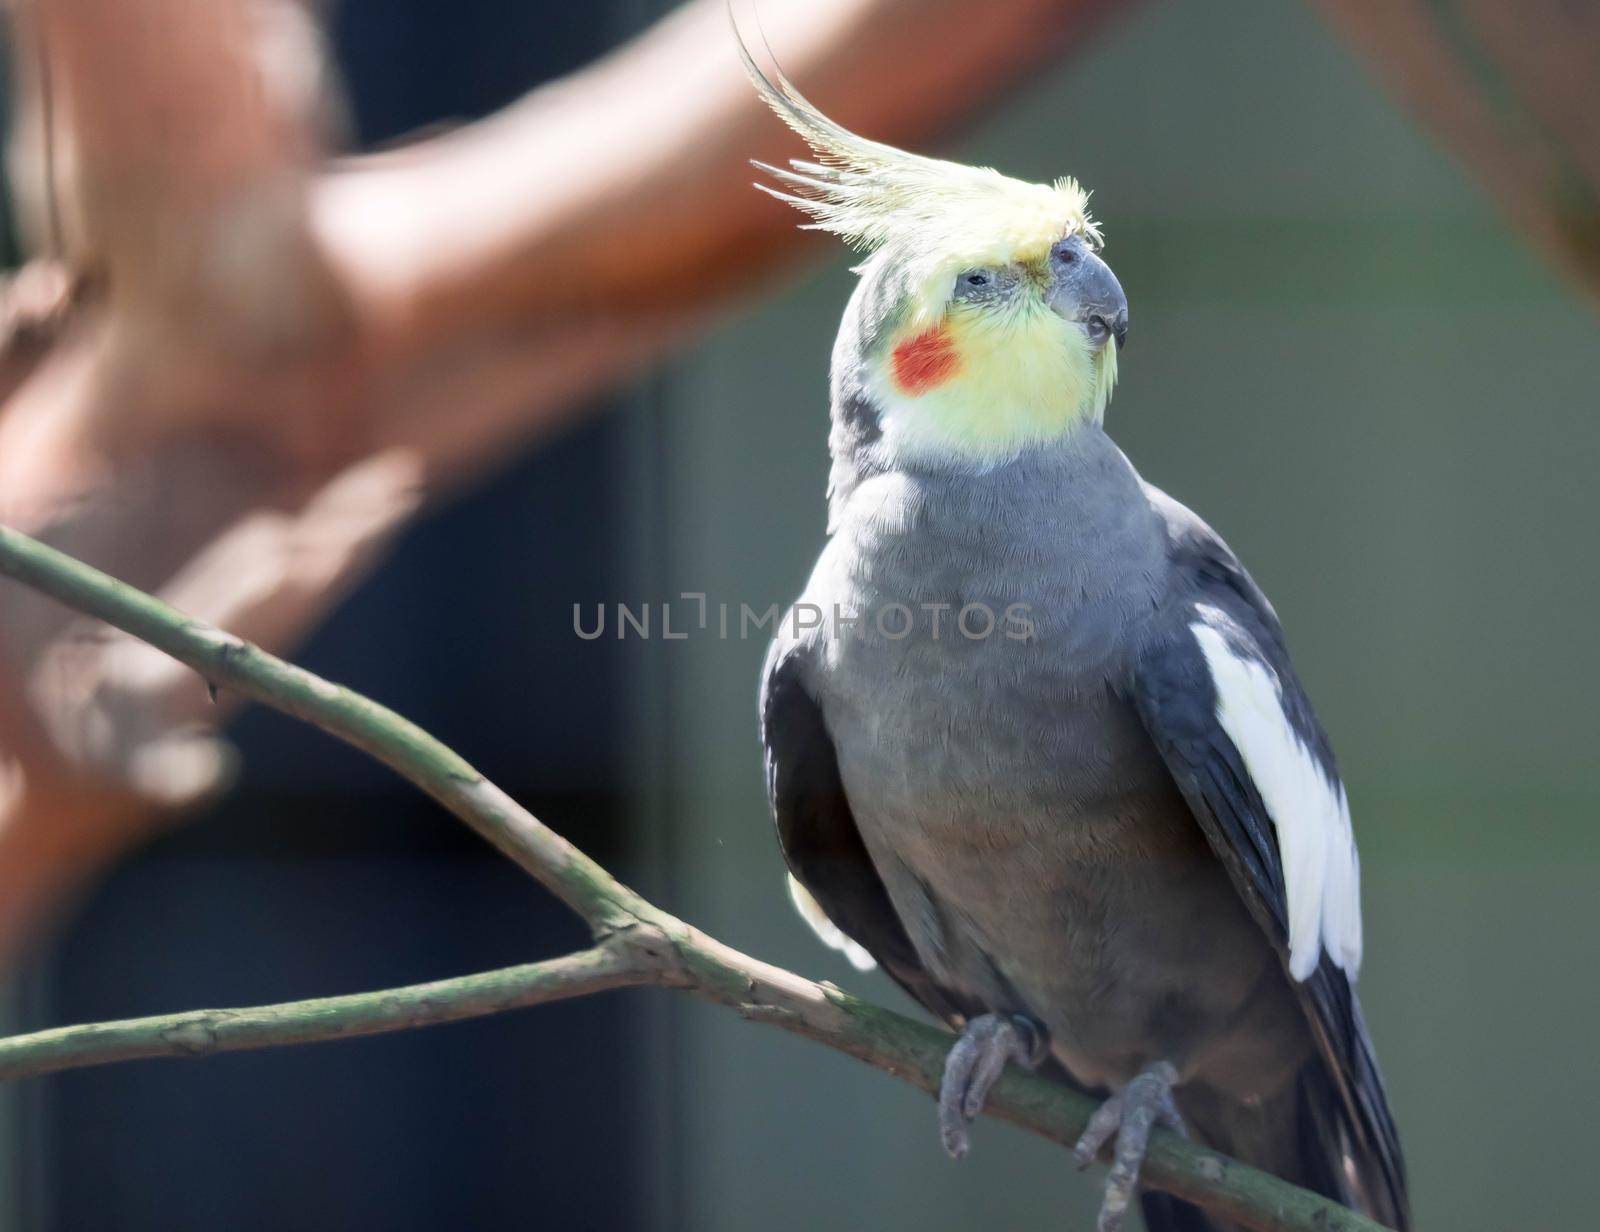 Closeup of a Cockatiel (Nymphicus hollandicus) with blurry background by billroque